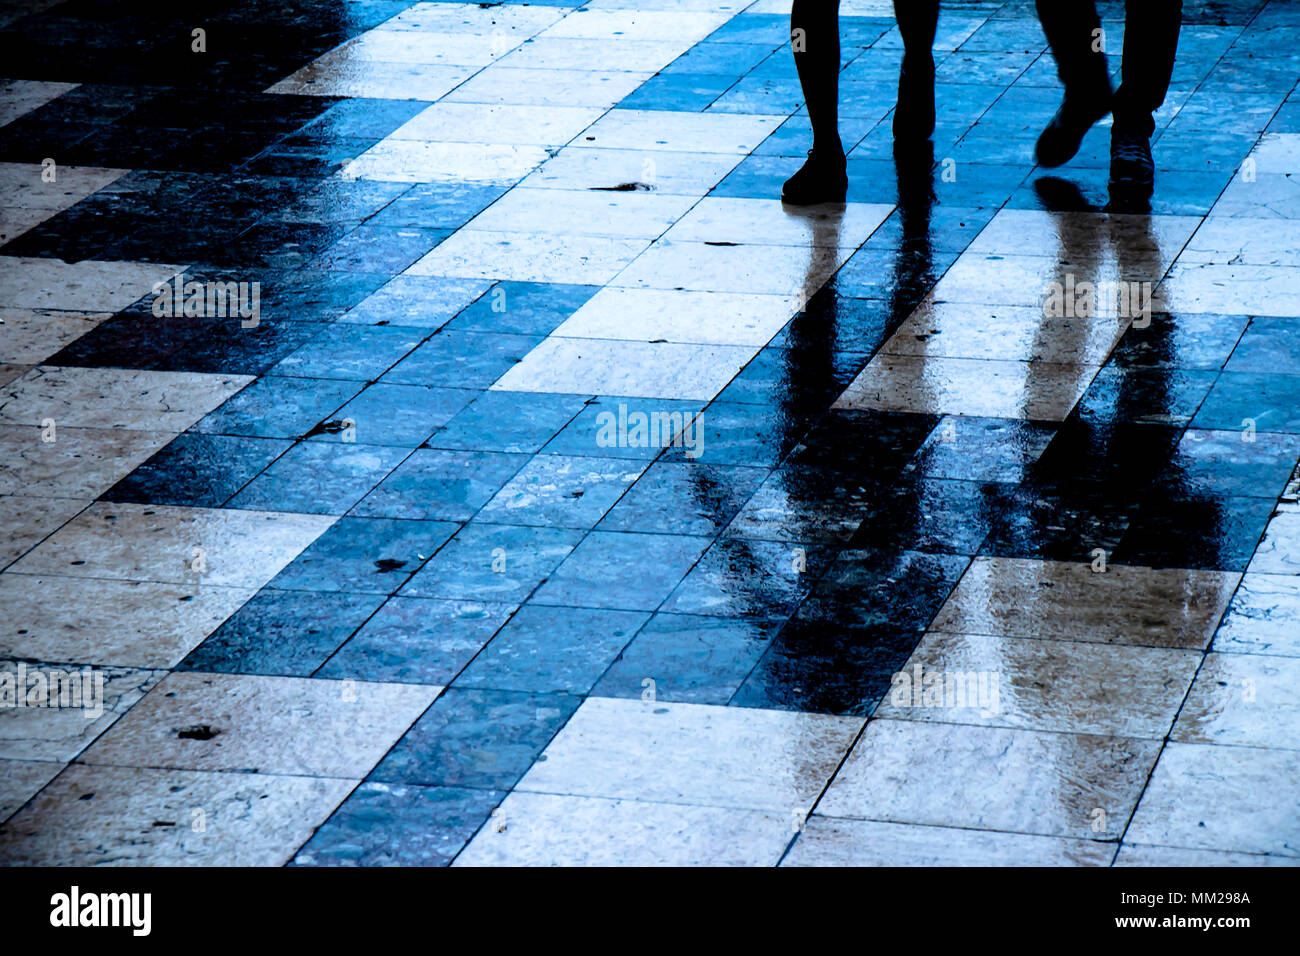 Blurry reflection shadow of two people walking the city street patterned sidewalk on a  rainy night Stock Photo